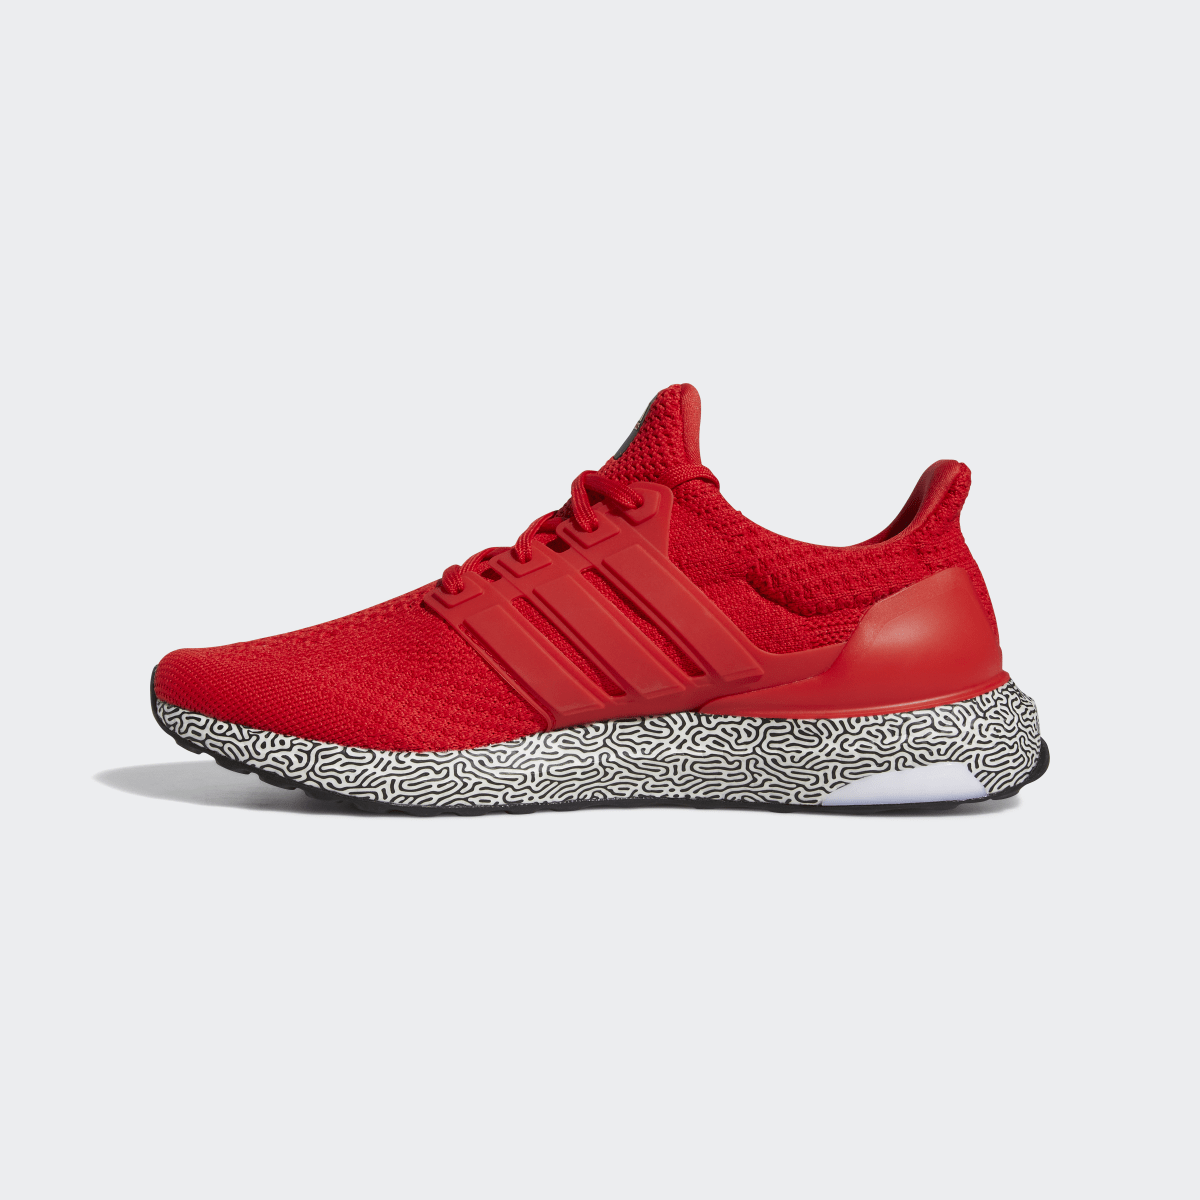 Adidas ULTRABOOST DNA SHOES. 7